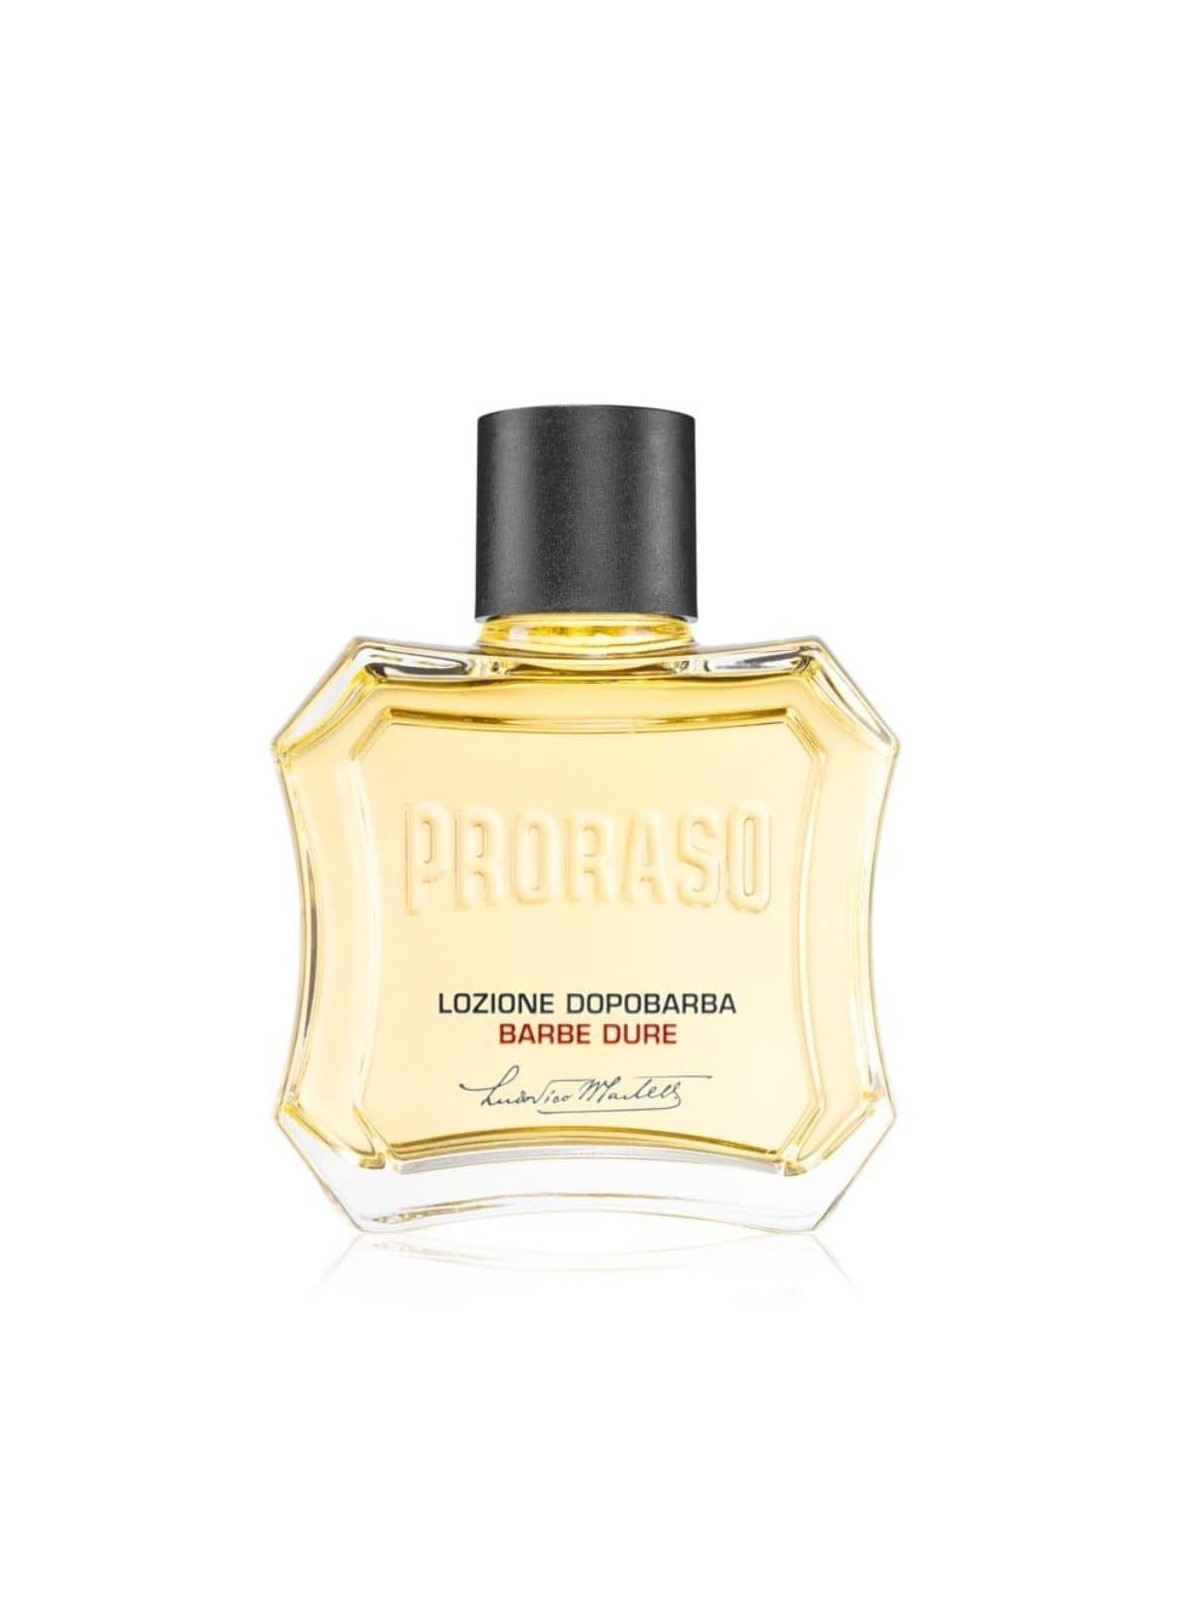 Proraso Aftershave Lotion for Hard Beards